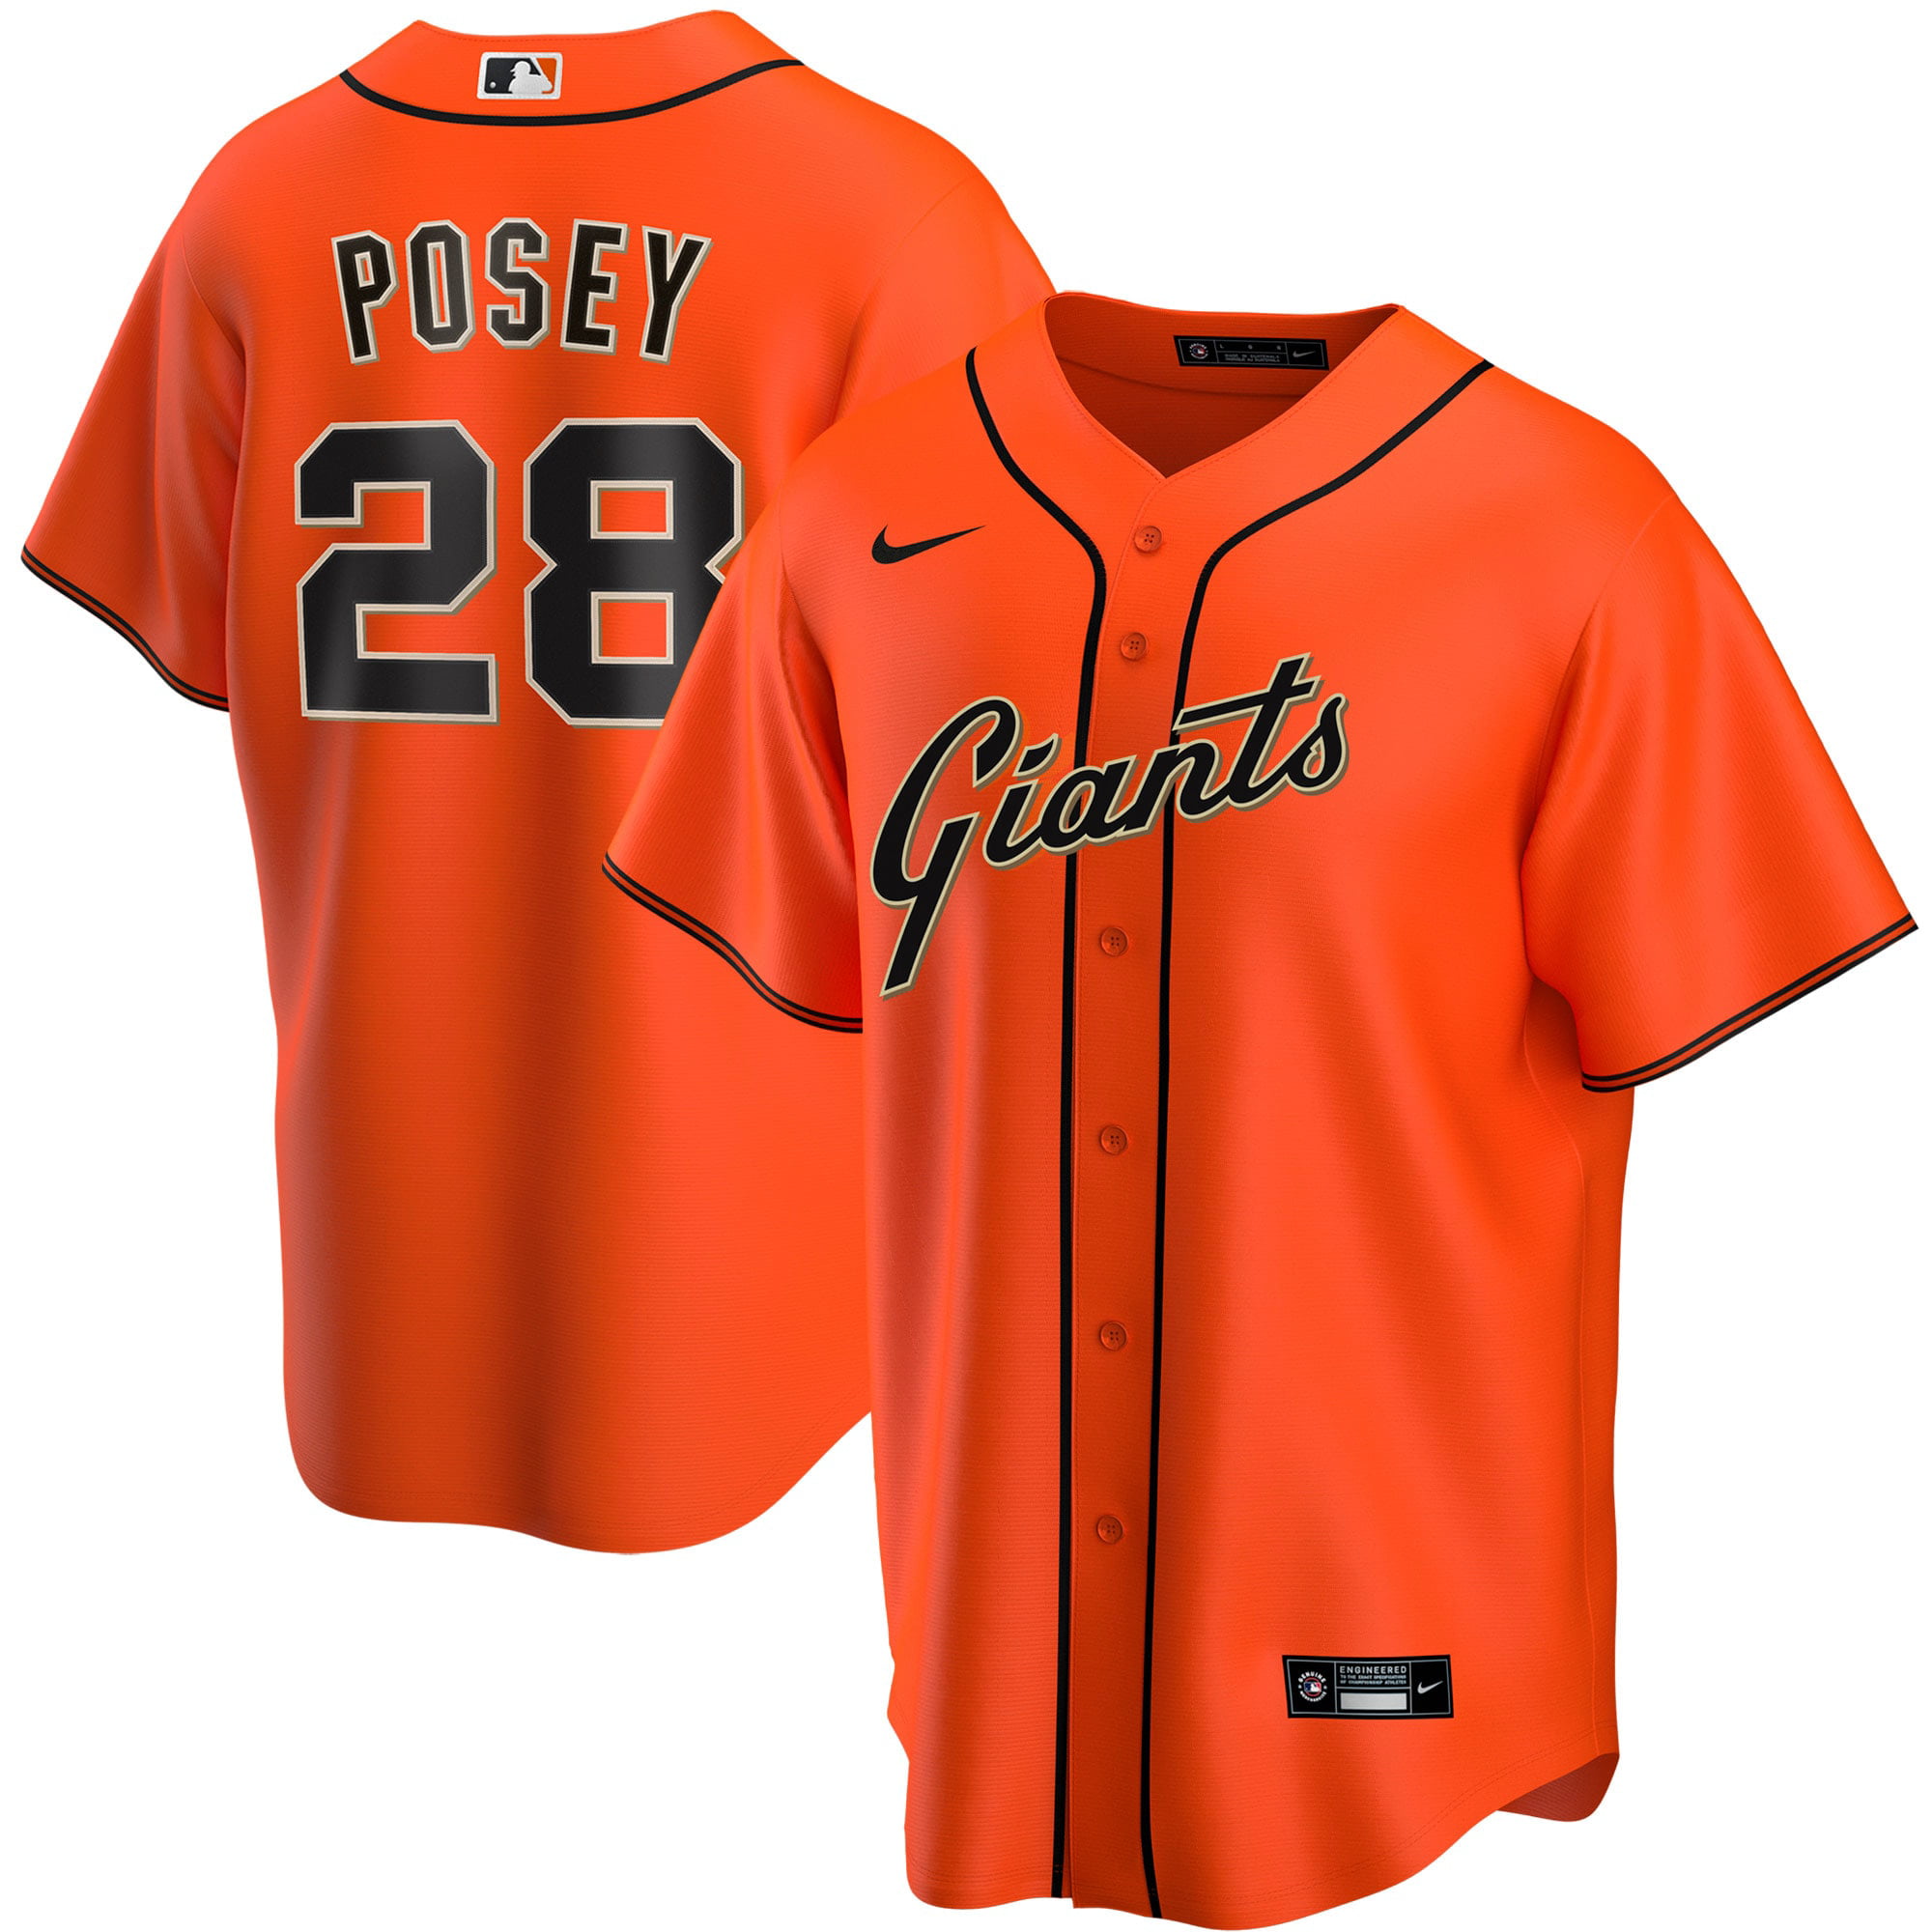 buster posey dog jersey